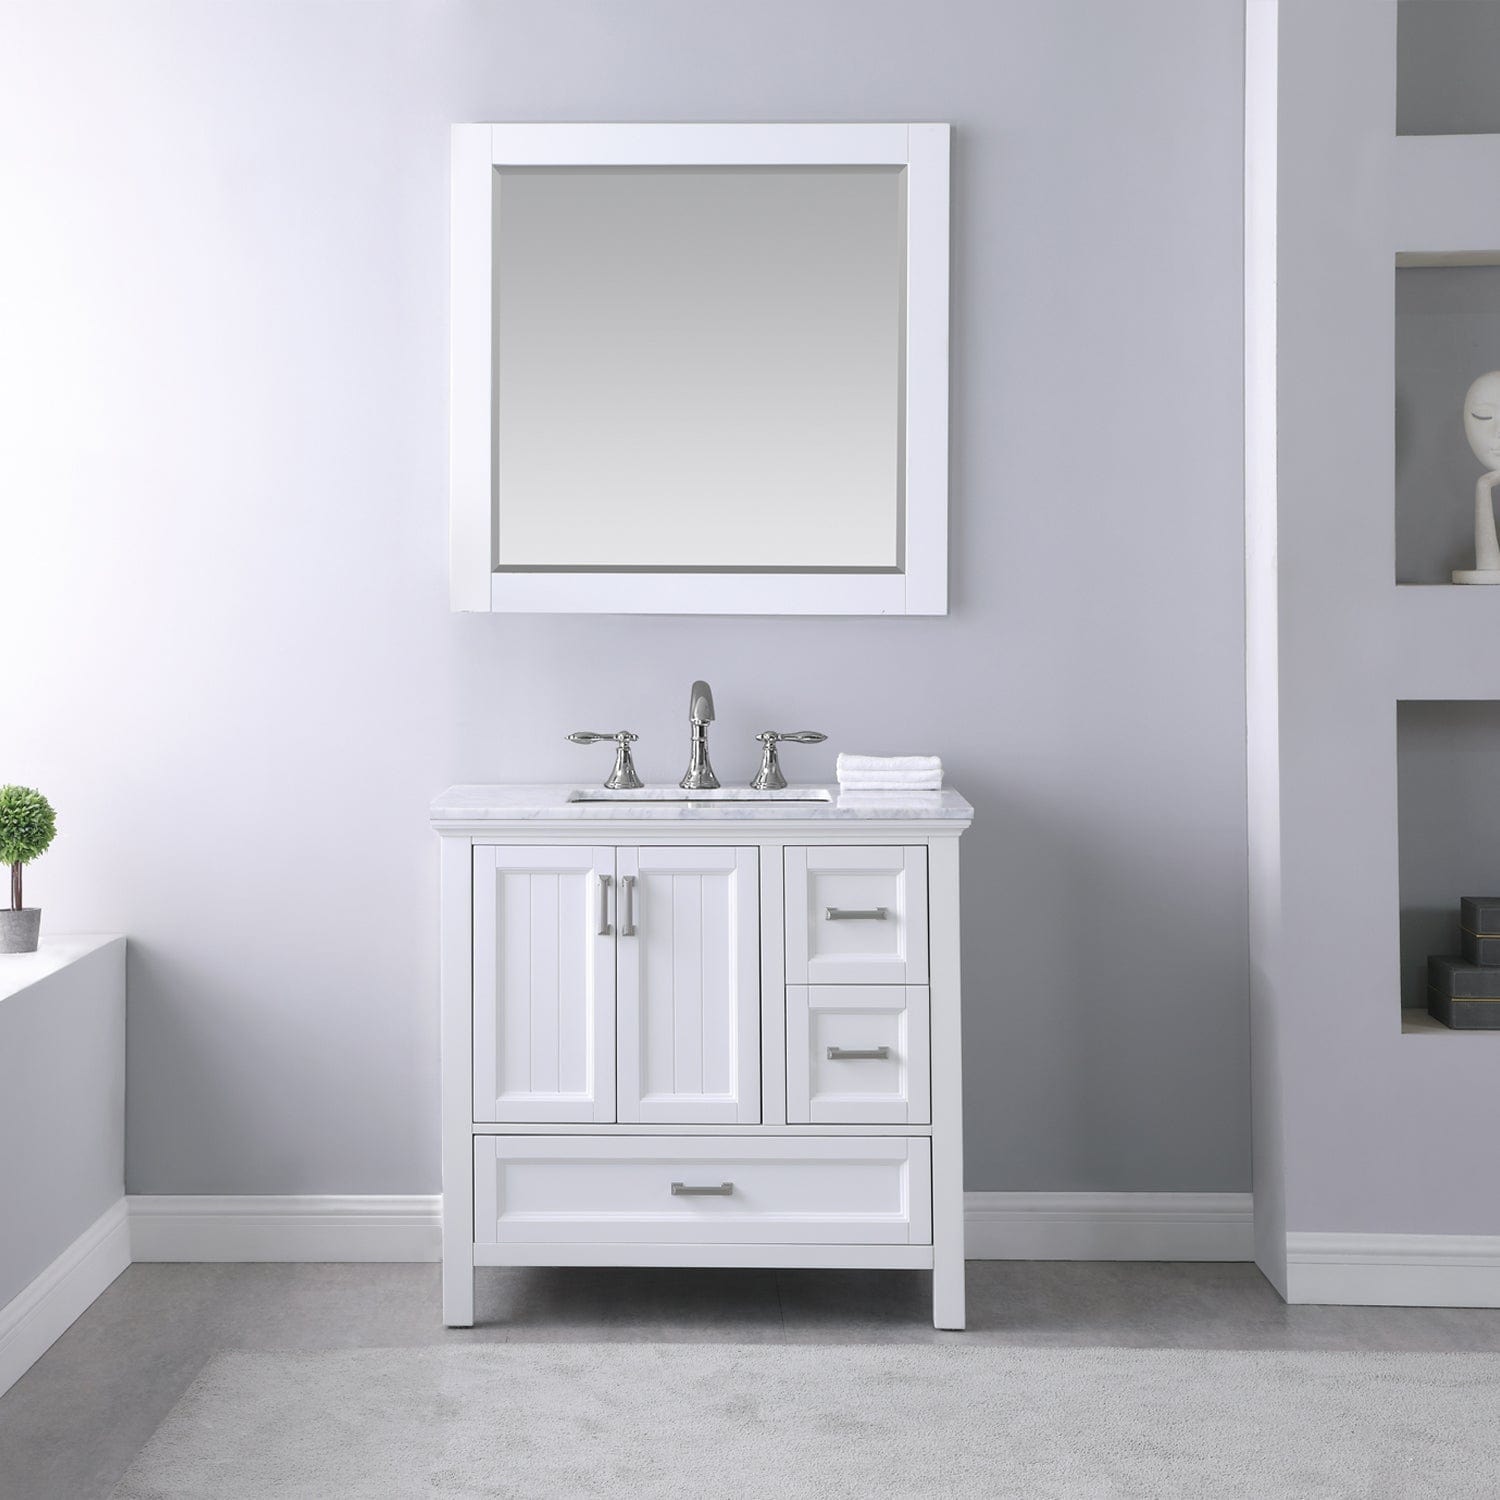 Altair Isla 36" Single Bathroom Vanity Set in White and Carrara White Marble Countertop with Mirror 538036-WH-CA - Molaix631112970815Vanity538036-WH-CA